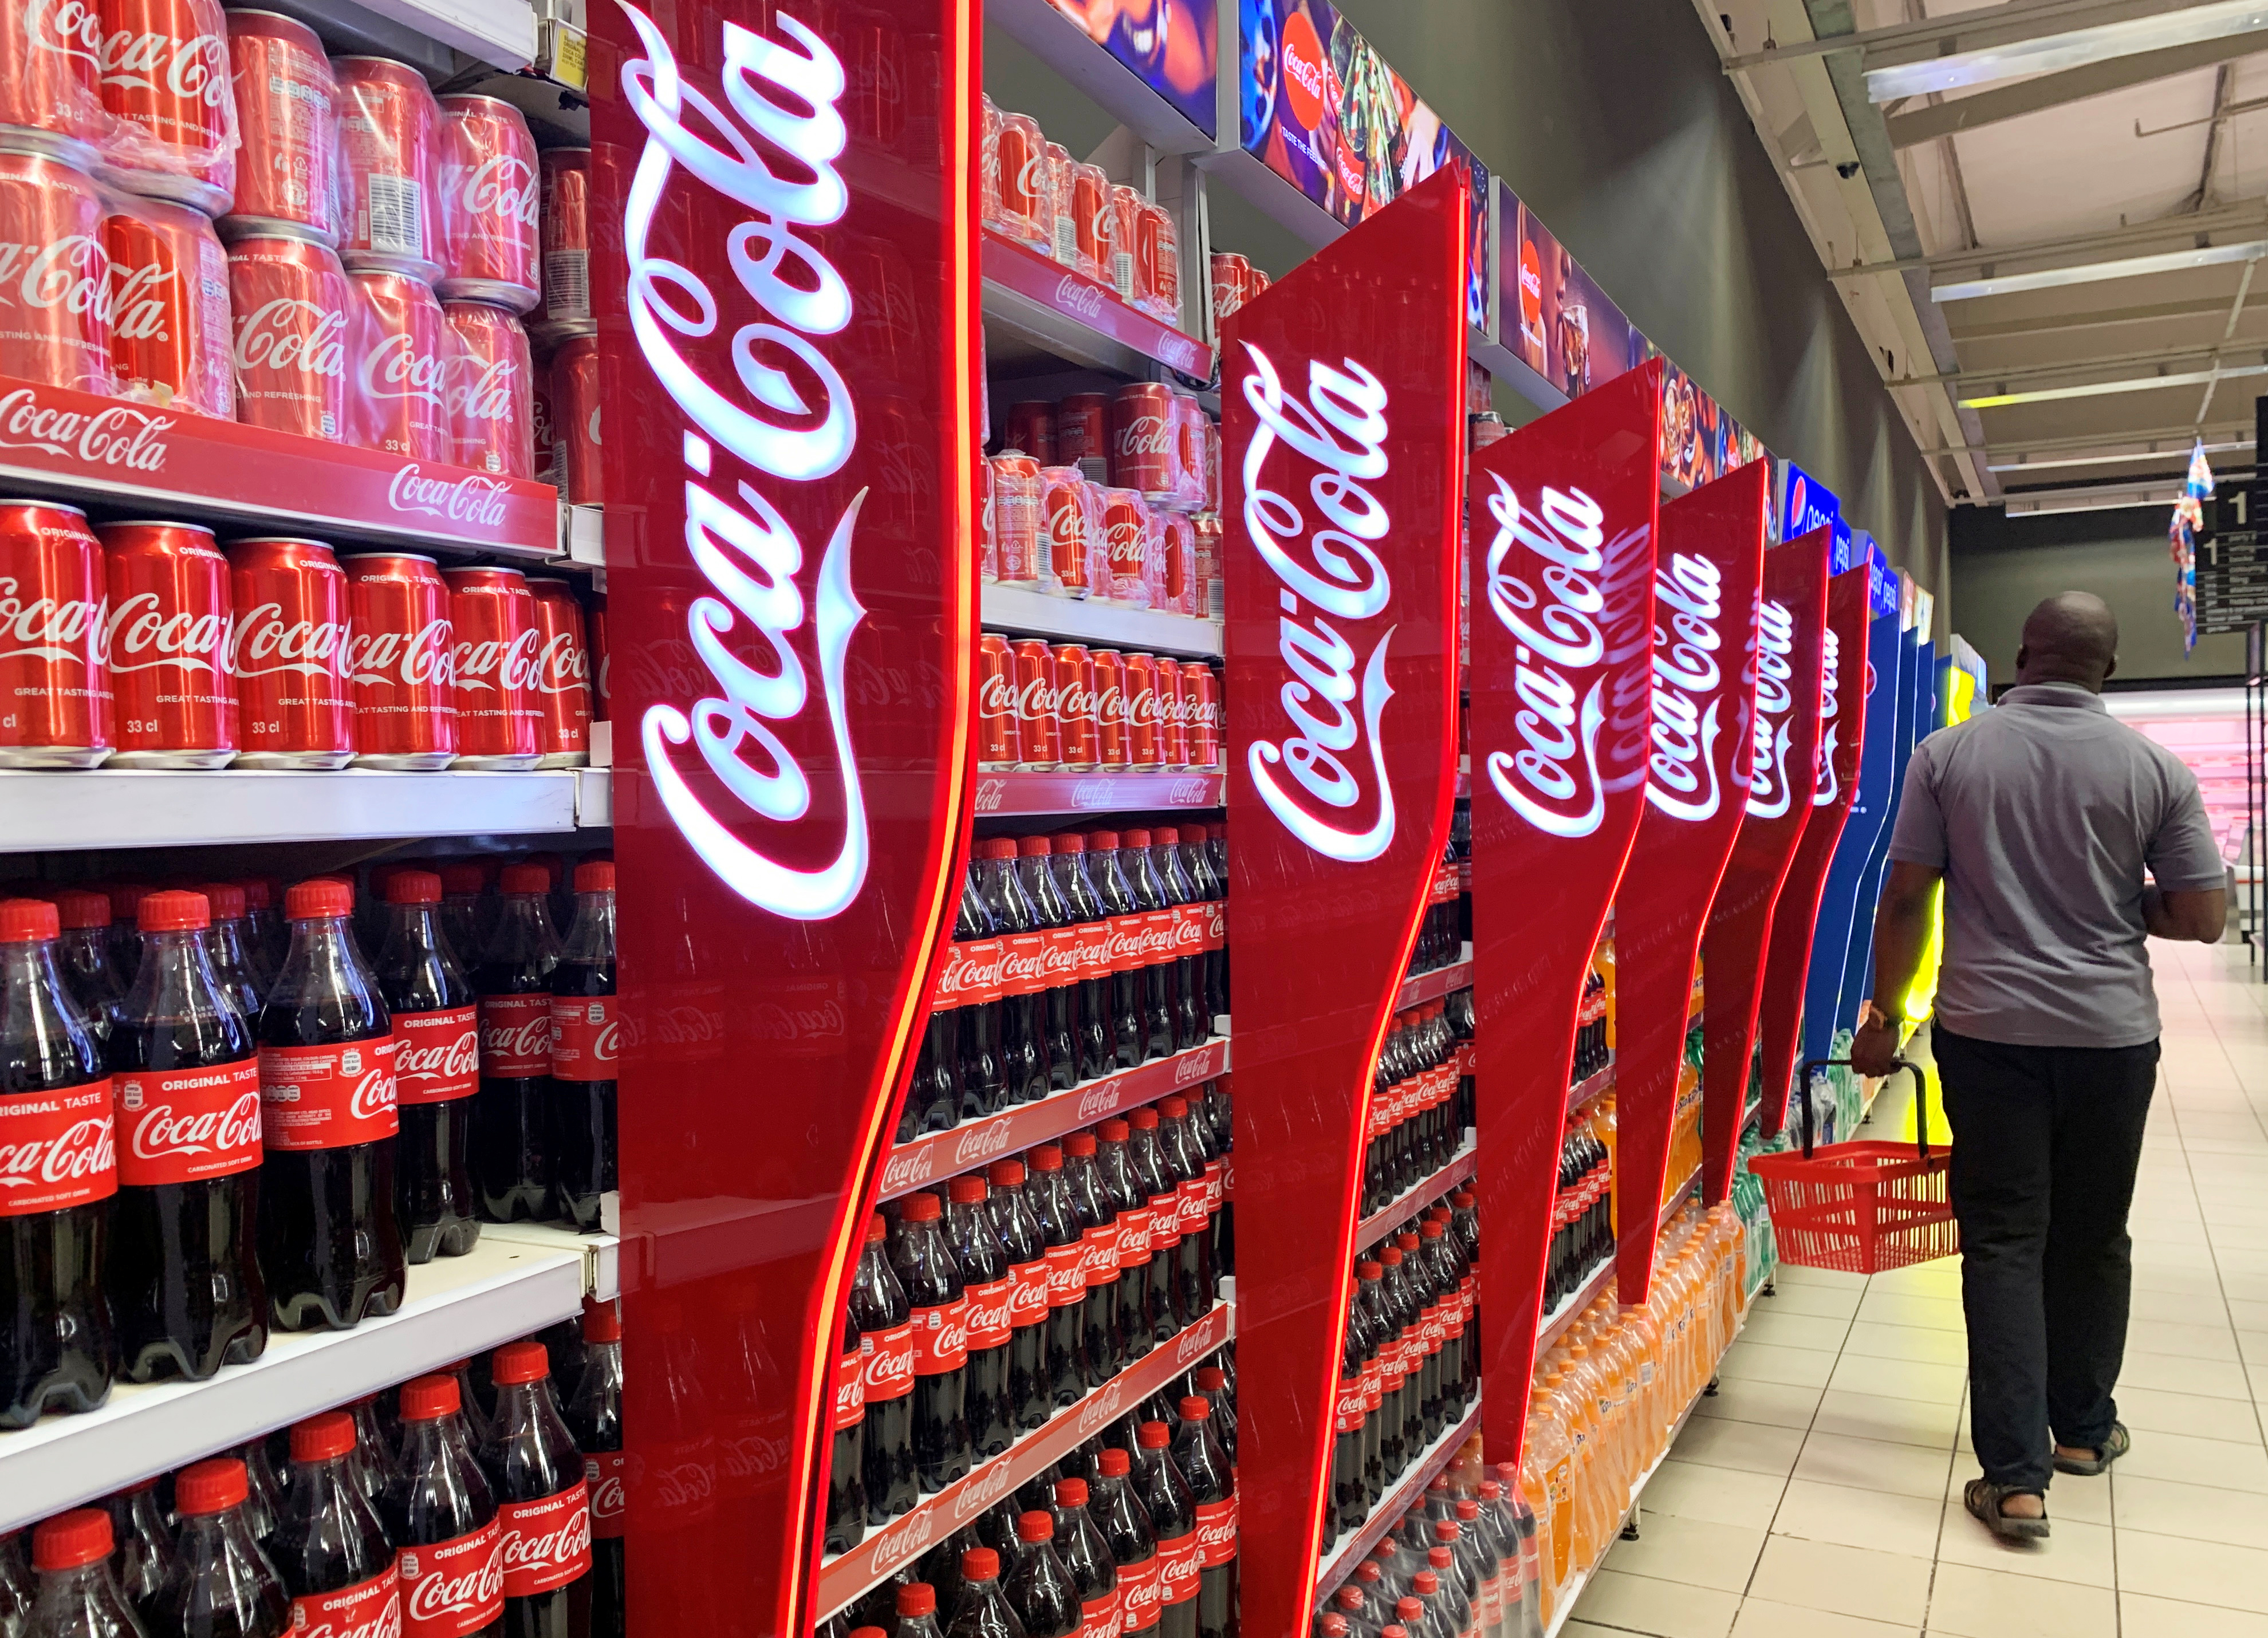 A man walks past shelves of Coca-Cola bottles and cans at a Shoprite store inside Palms shopping mall in Lagos